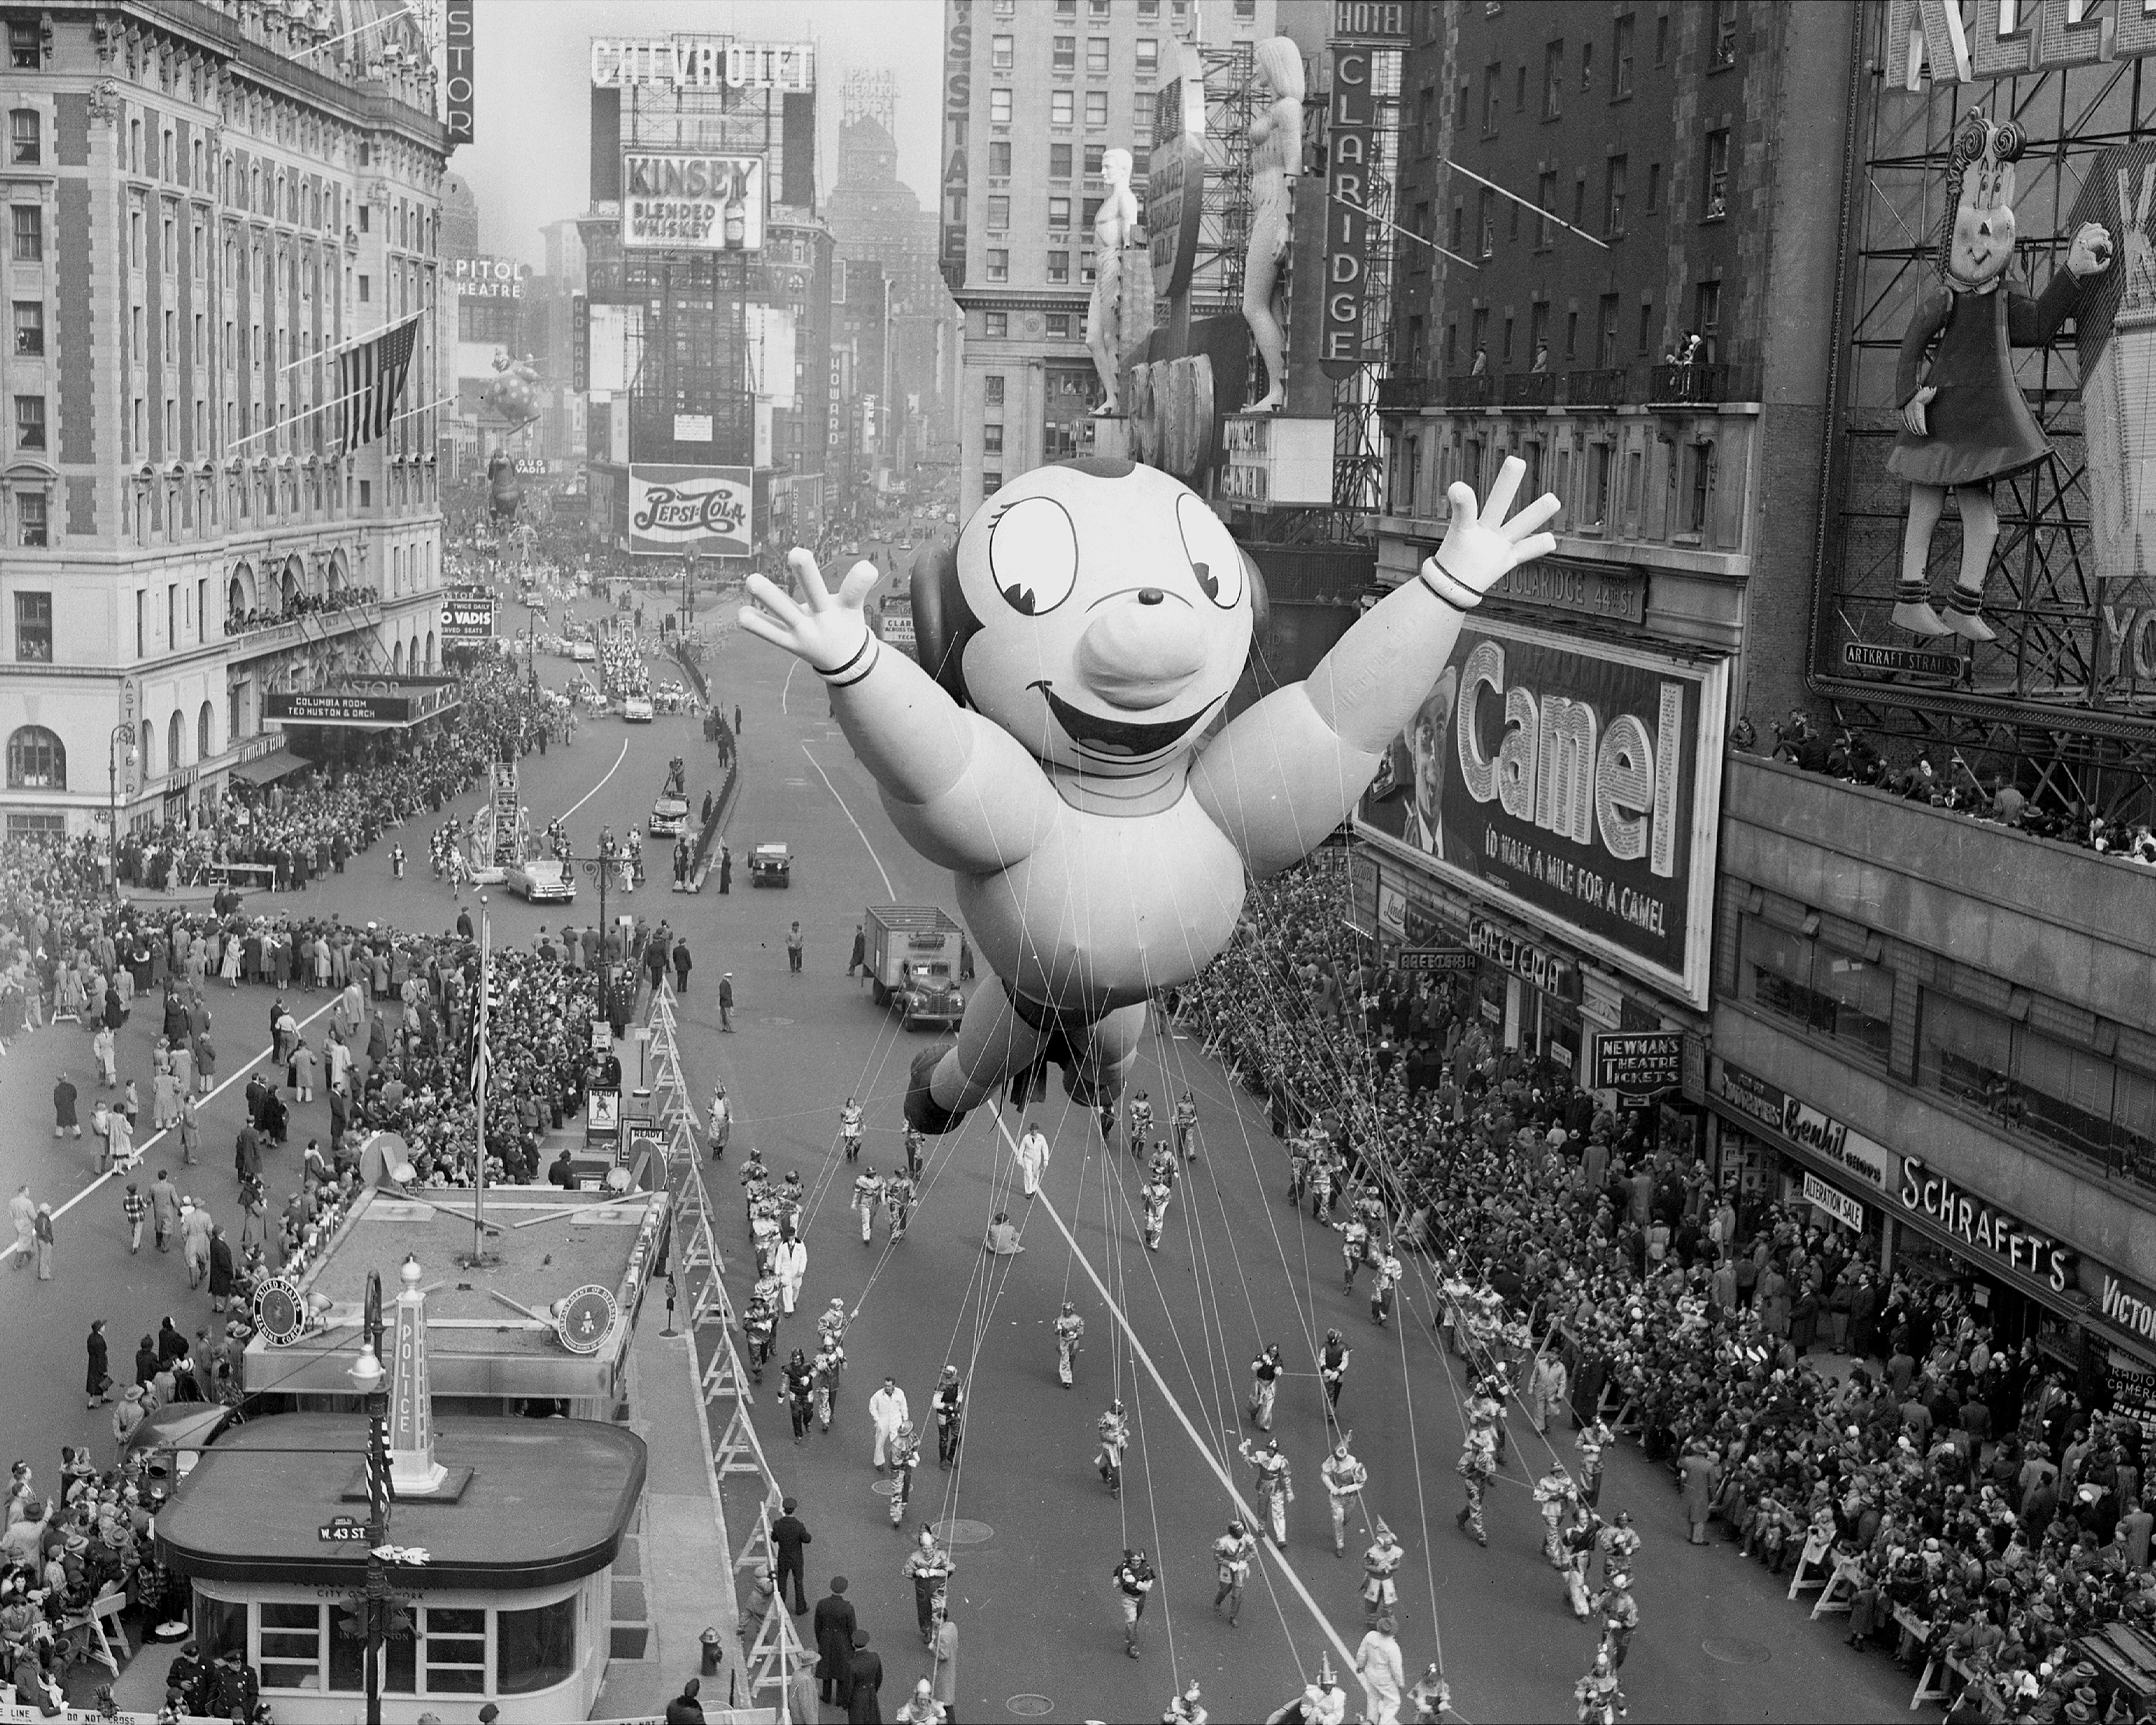 macy's thanksgiving day parade - Chete Kinsey alone Te ht Pito Mo Syo canel A. Sten Schrets Ele